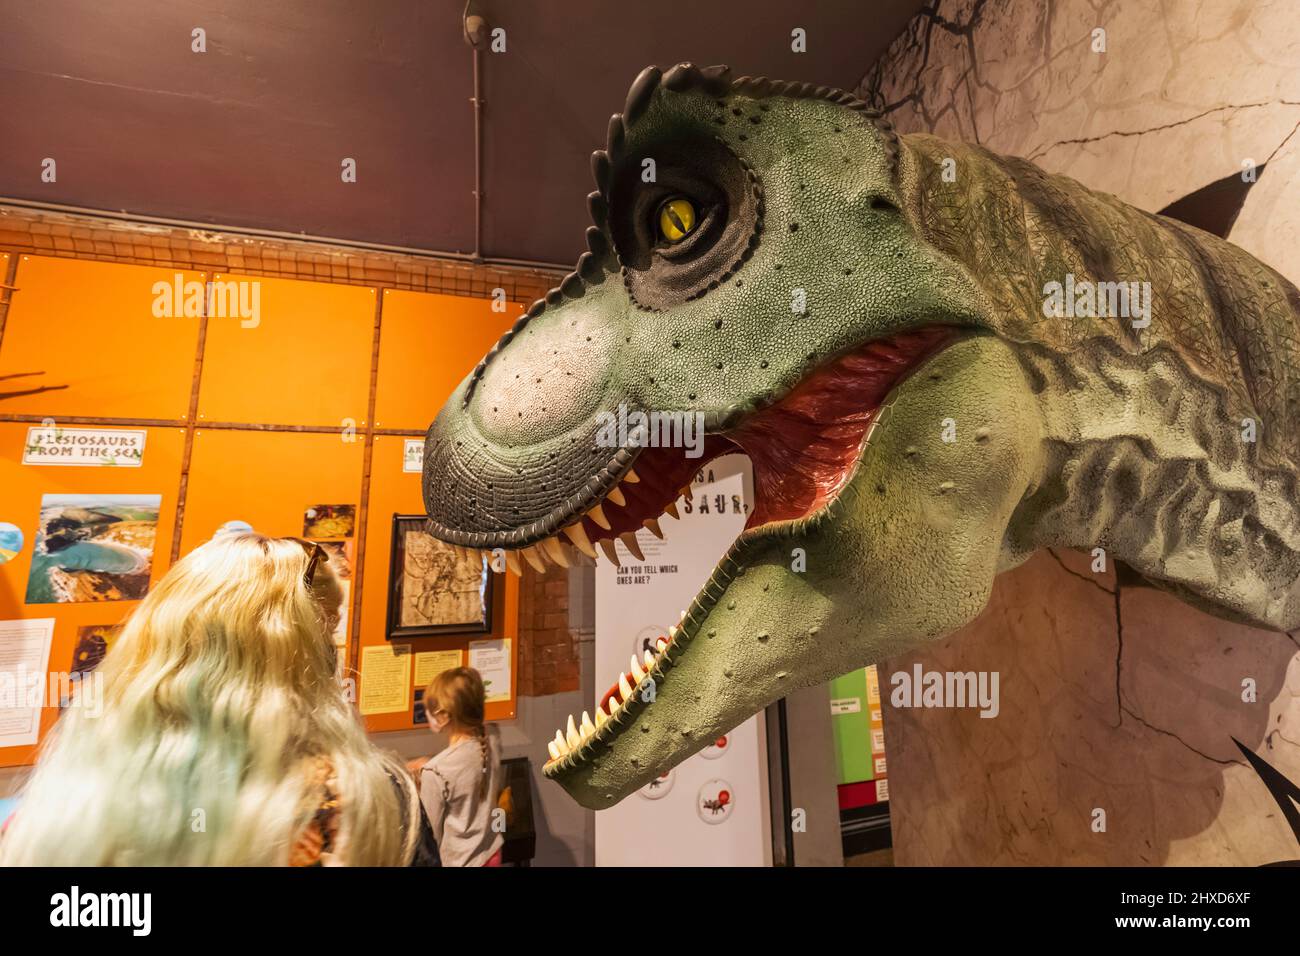 England, Dorset, Dorchester, The Dinosaur Museum, Model of a Dinosaur Head and Museum Visitors Stock Photo